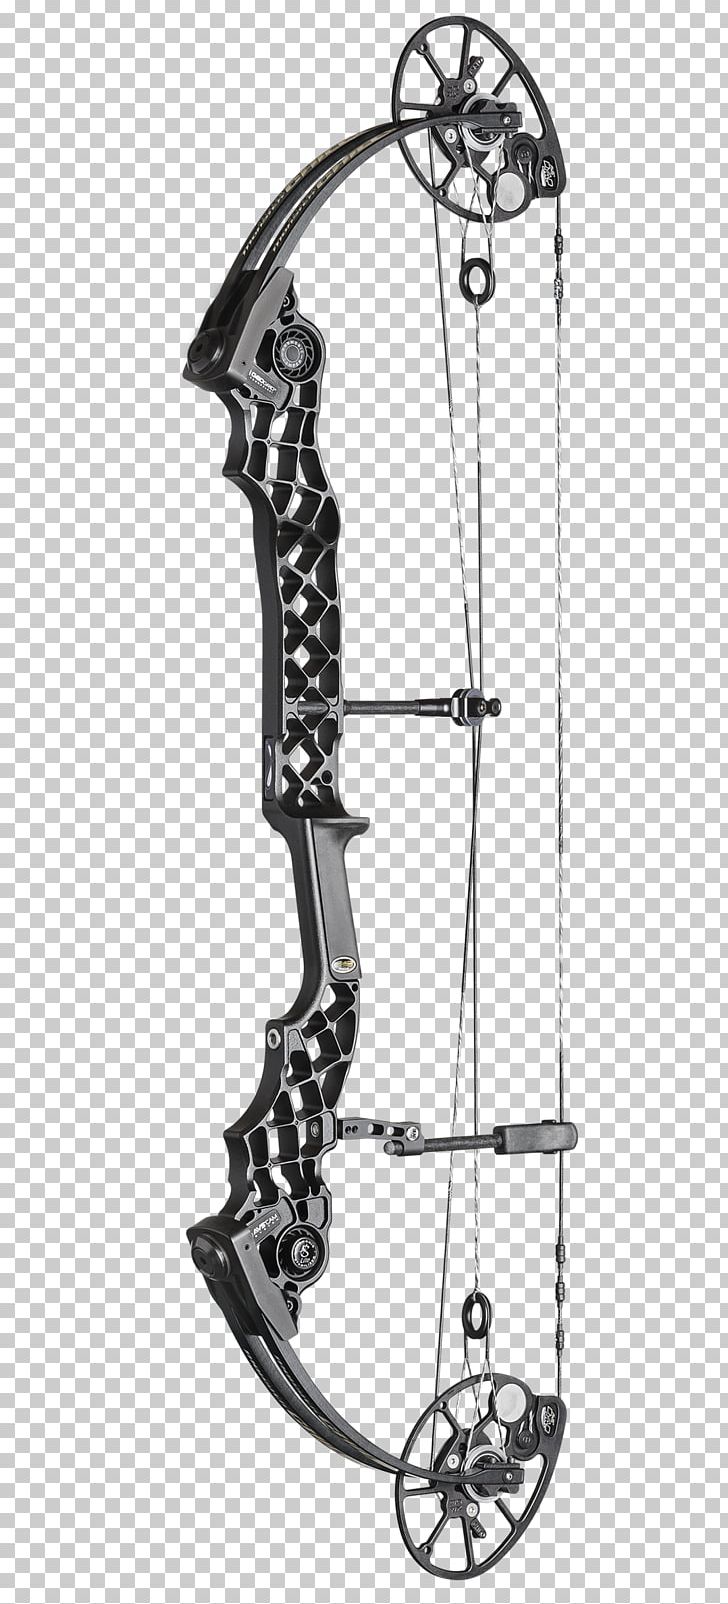 Compound Bows Bow And Arrow Archery Bowhunting PNG, Clipart, Archery, Arrow, Bear Archery, Black And White, Bow Free PNG Download